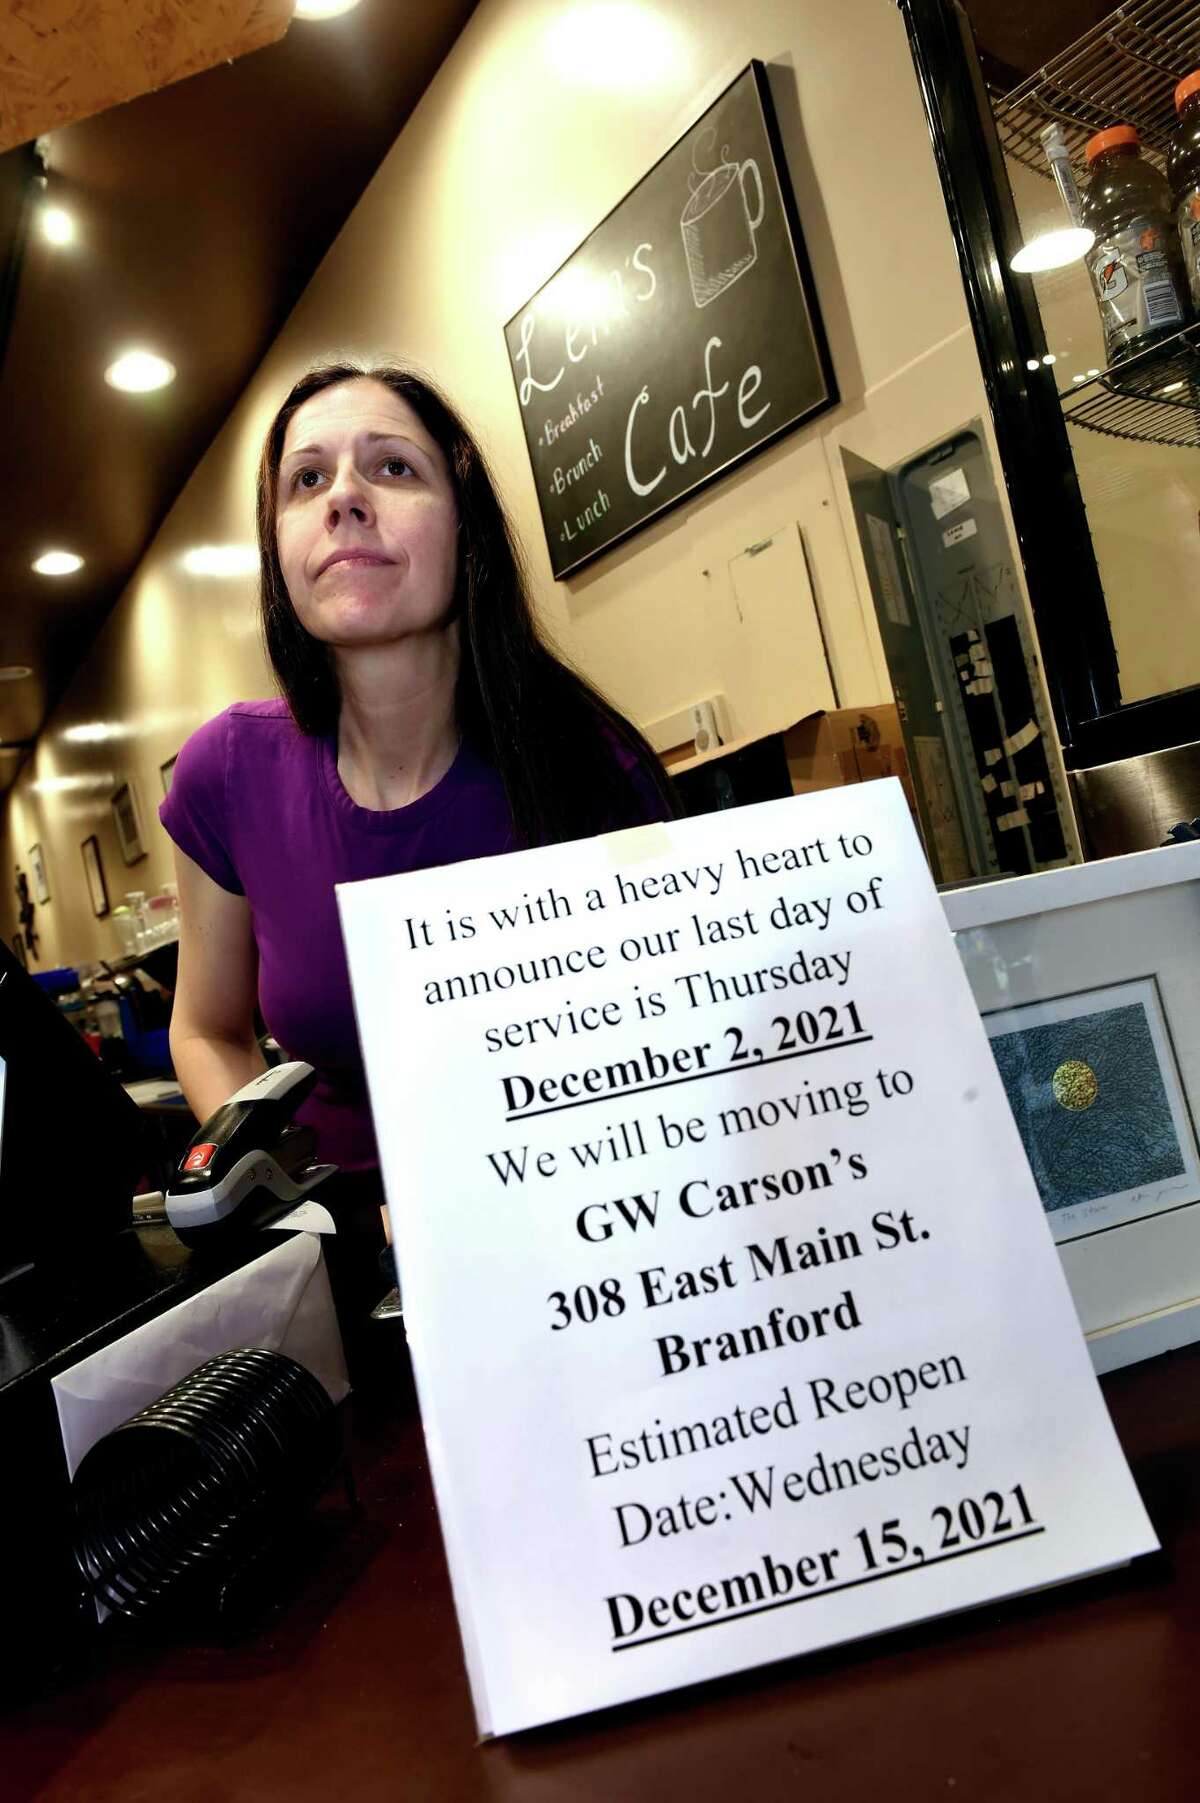 Christine Casinghino, owner of Lena’s Cafe and Confections, is photographed behind the counter at the restaurant on Whalley Avenue in New Haven Nov. 22, 2021. Casinghino will close the restaurant Dec. 2 and bring the Lena’s breakfast and brunch menu to GW Carson’s in Branford around Dec. 15.